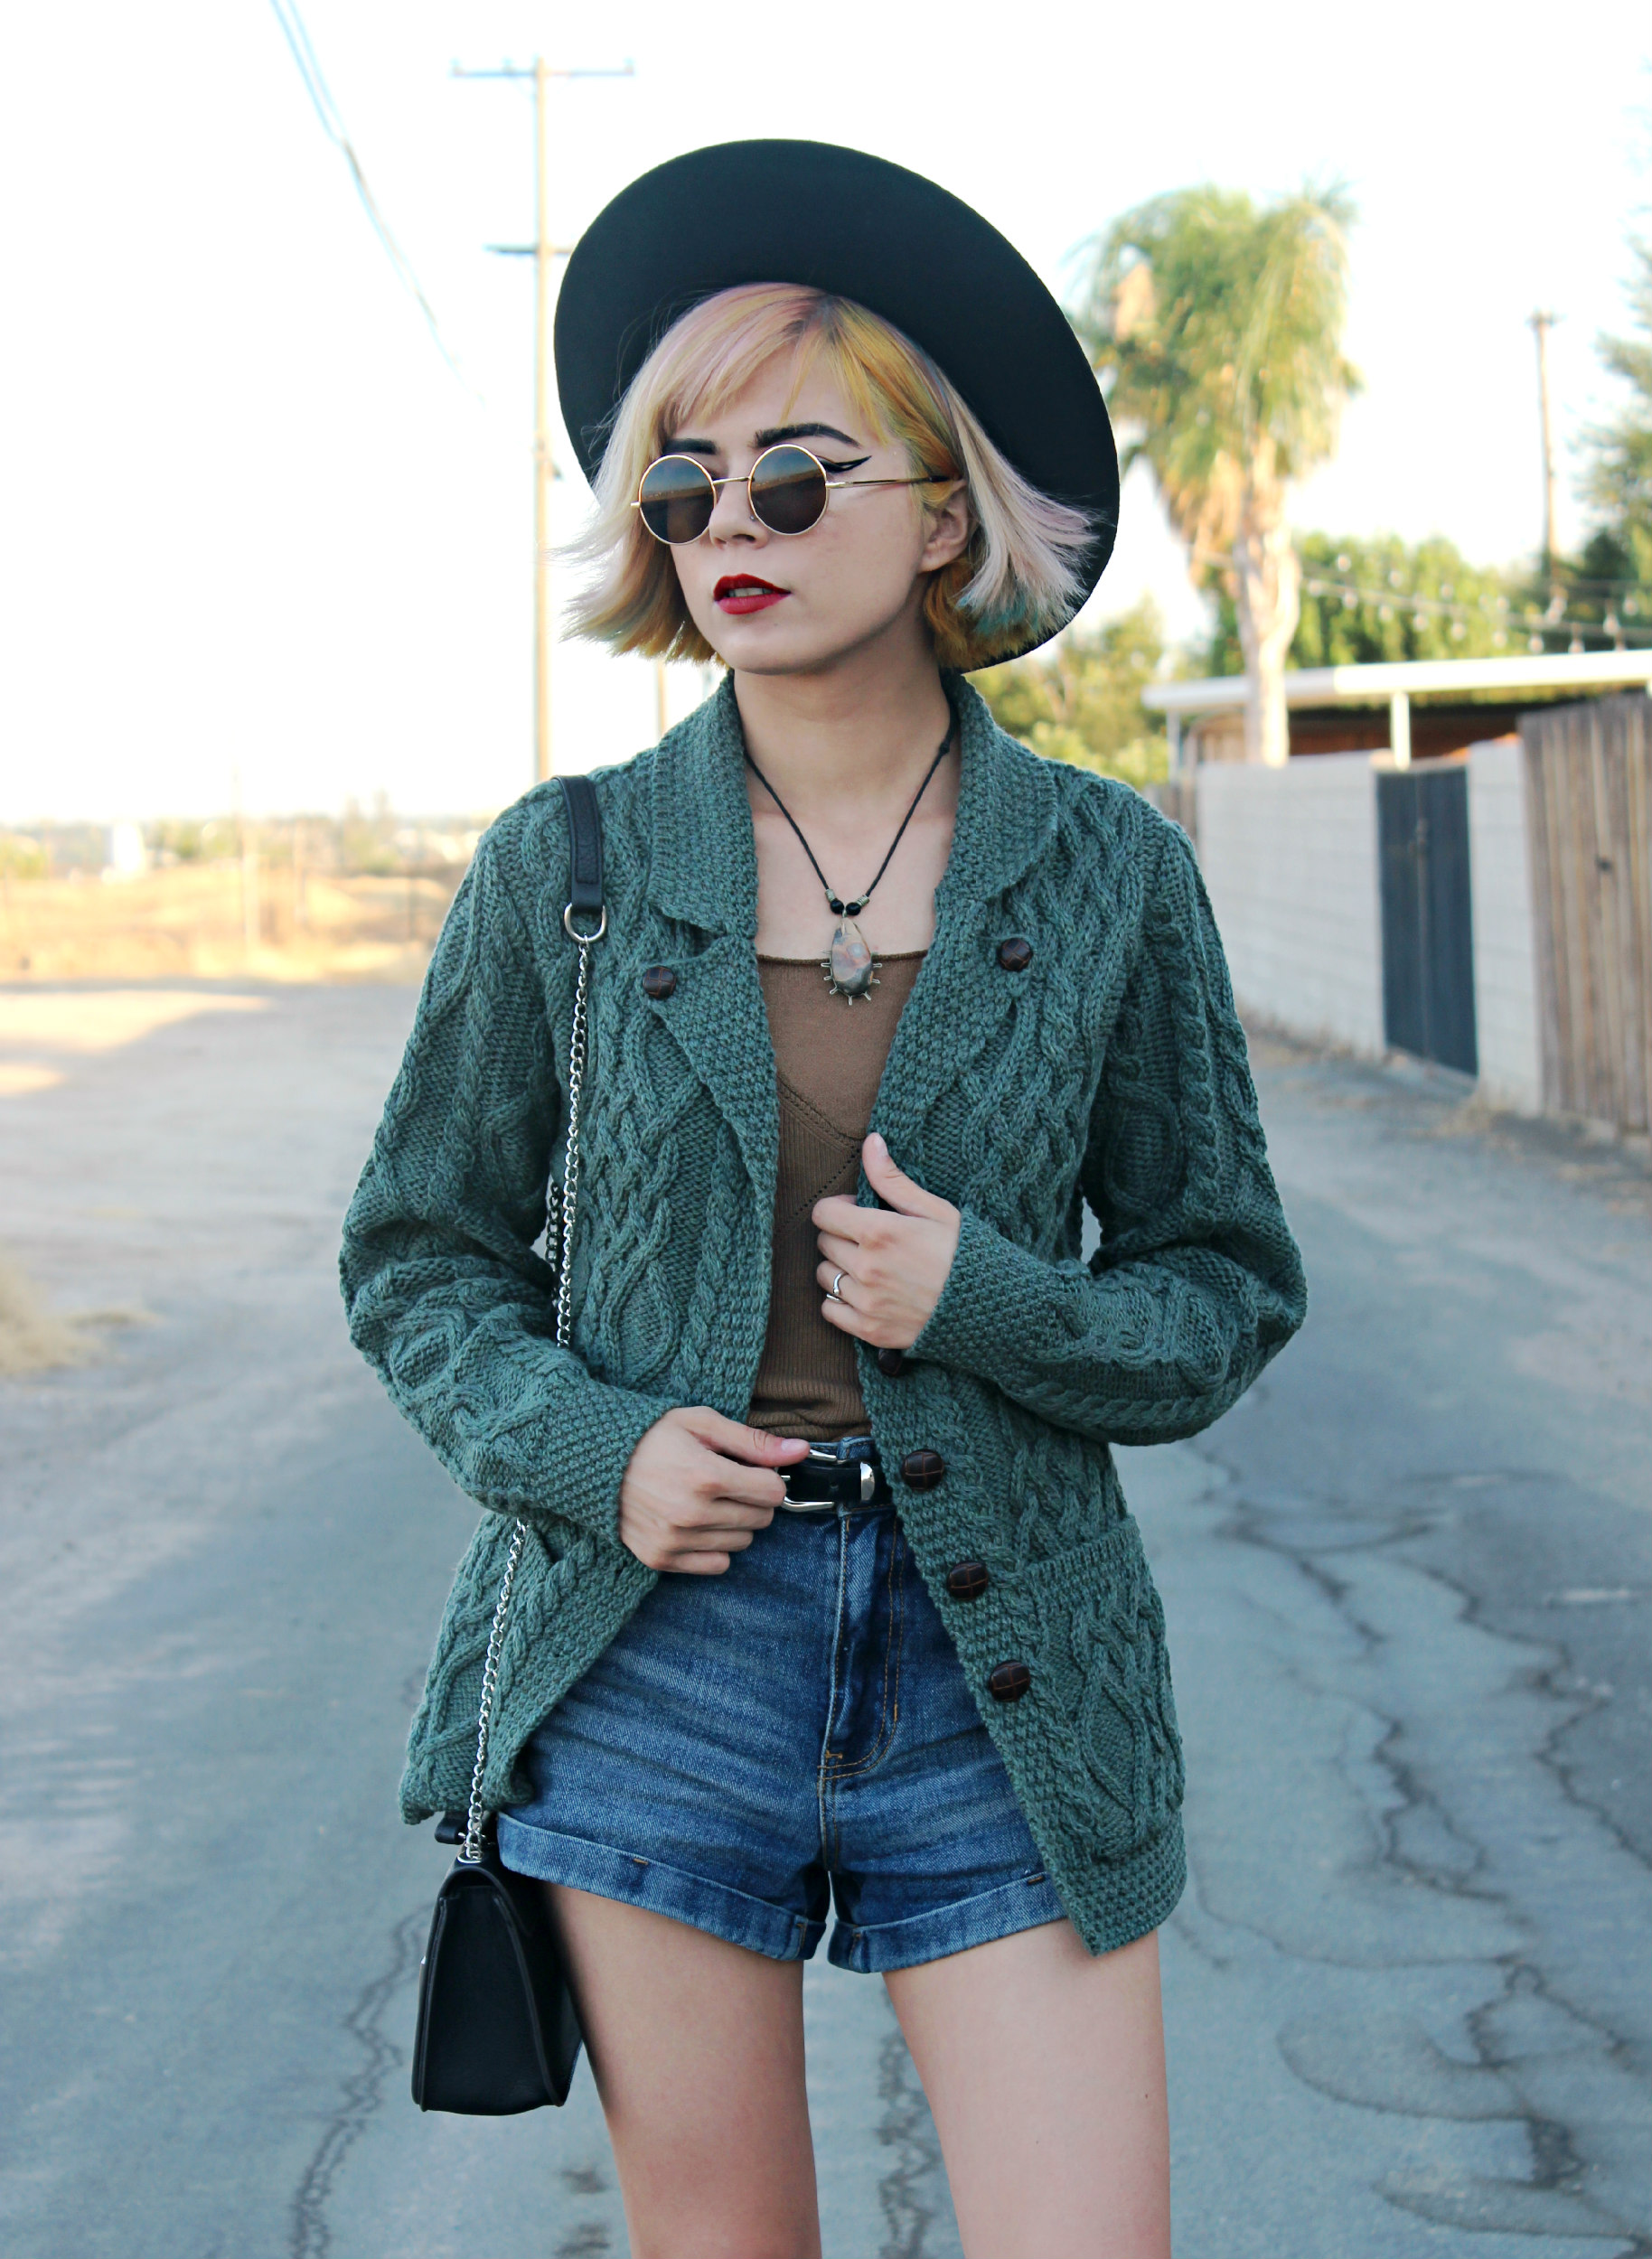 Aran Sweaters: Earthy Grunge Outfit of the Day - STYLE BAUS